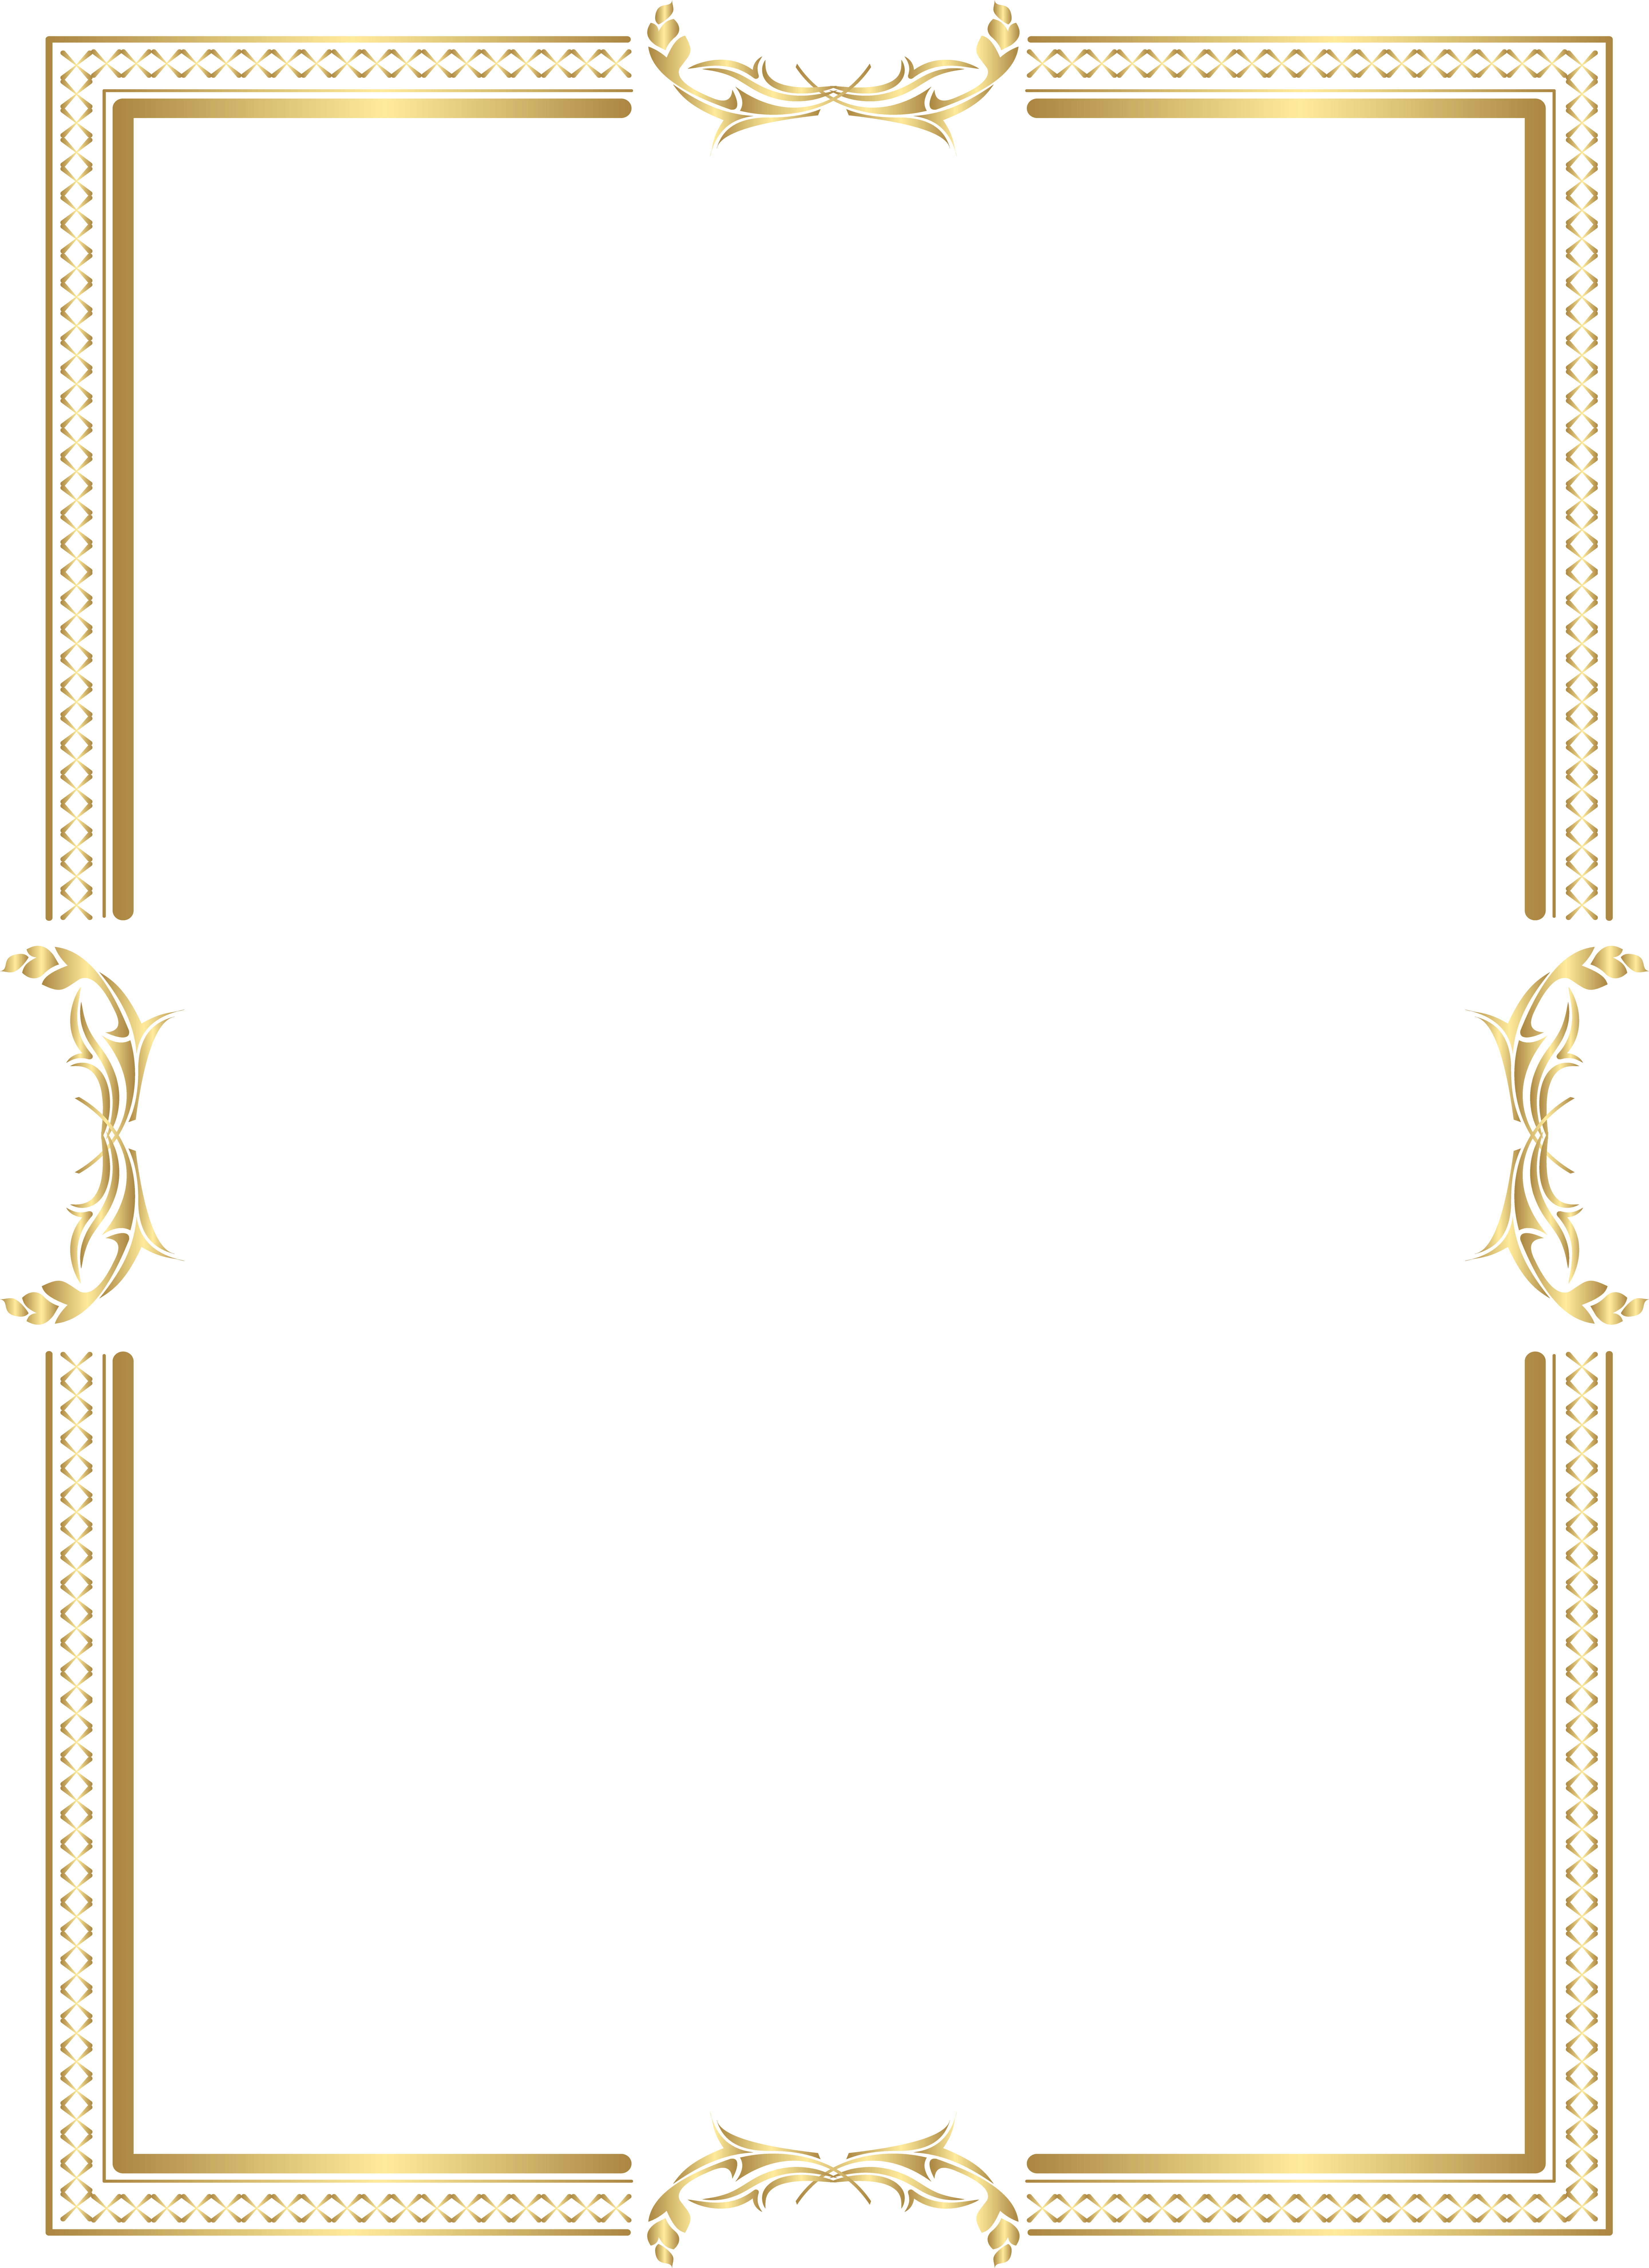 Download Transparent Gold Border PNG Image with No Background - PNGkey.com